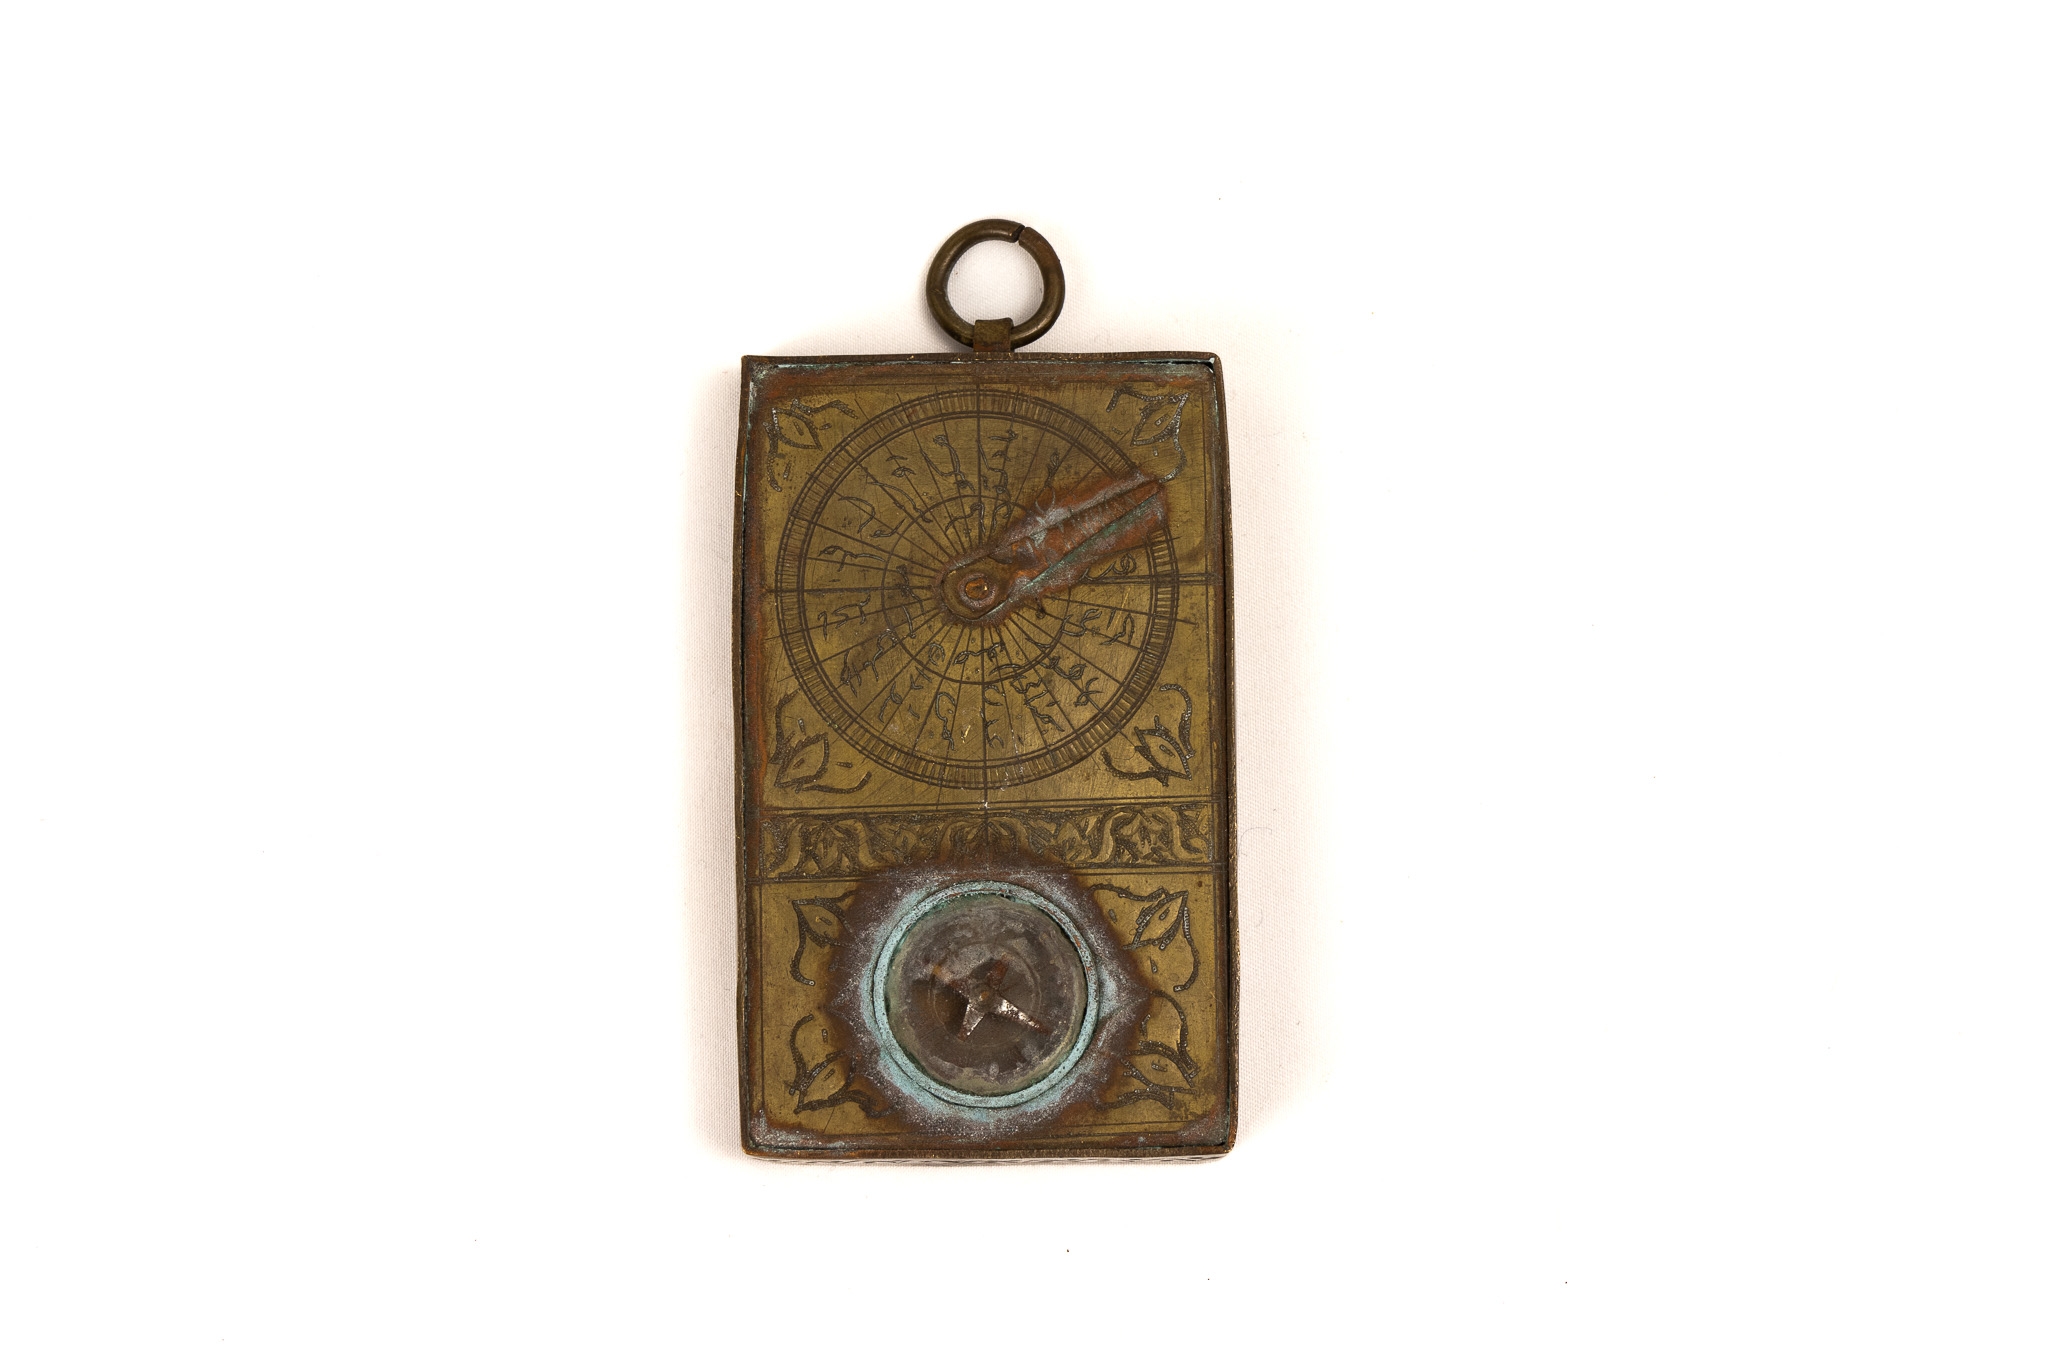 An Islamic Brass Pocket Compass.

Approximately 9.3x 5.8cm 